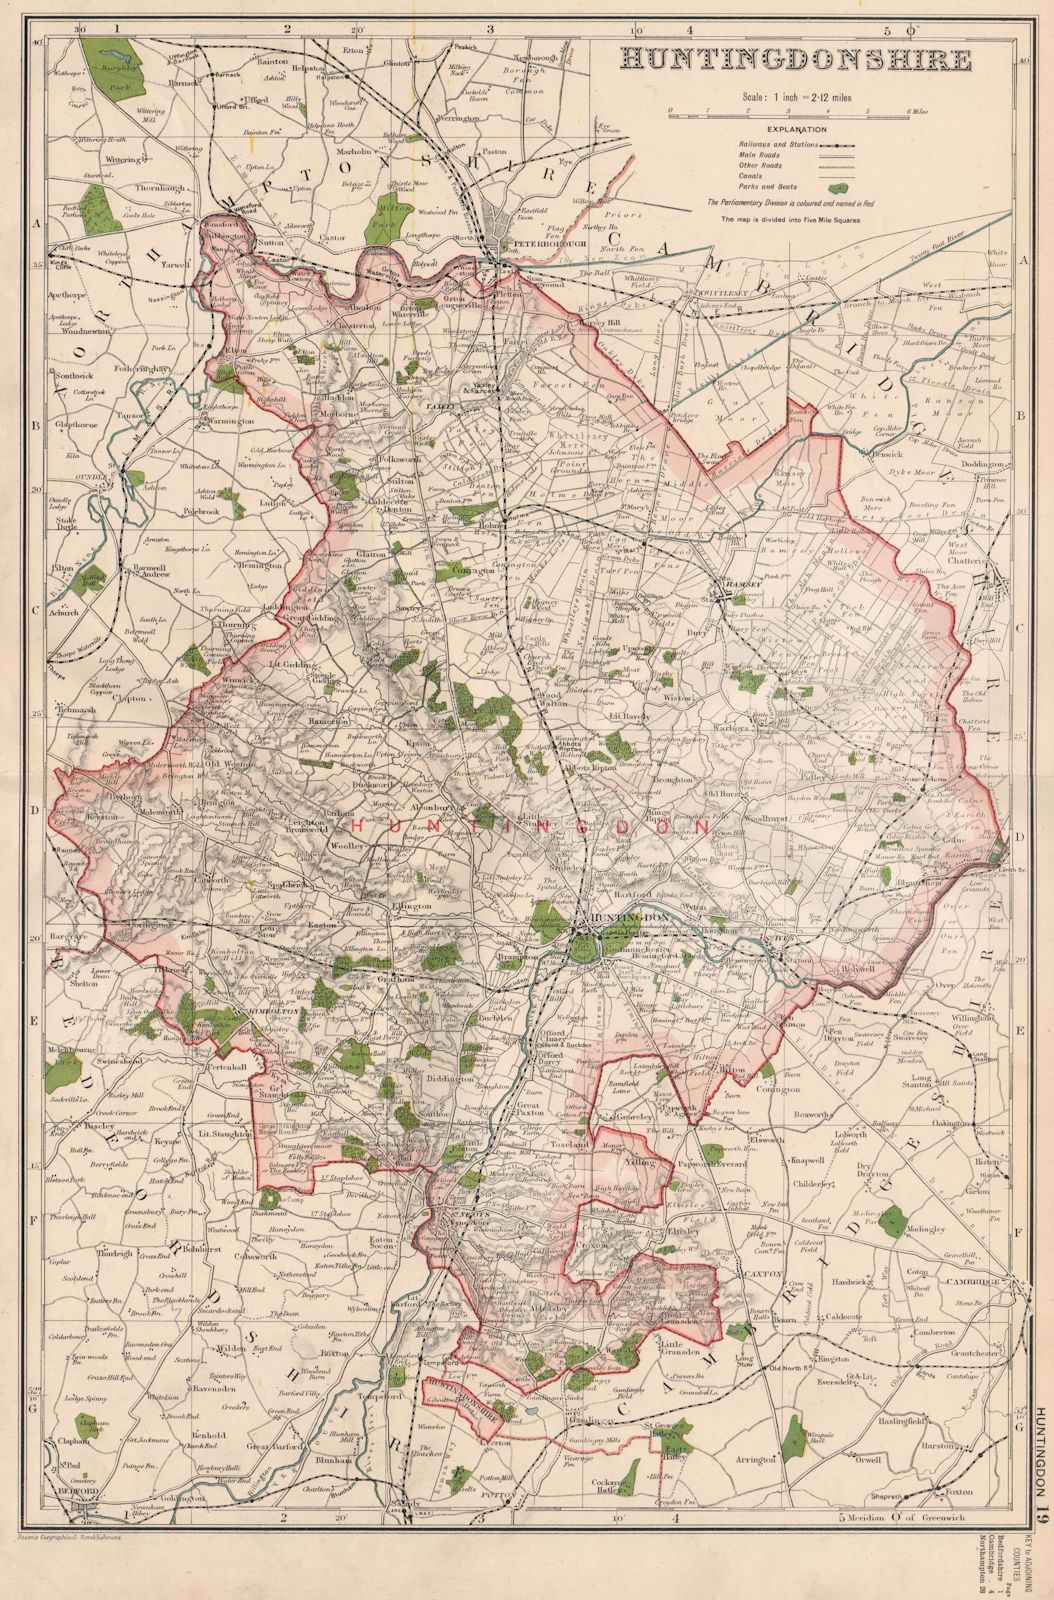 HUNTINGDONSHIRE.Showing Parliamentary divisions,boroughs & parks.BACON 1936 map